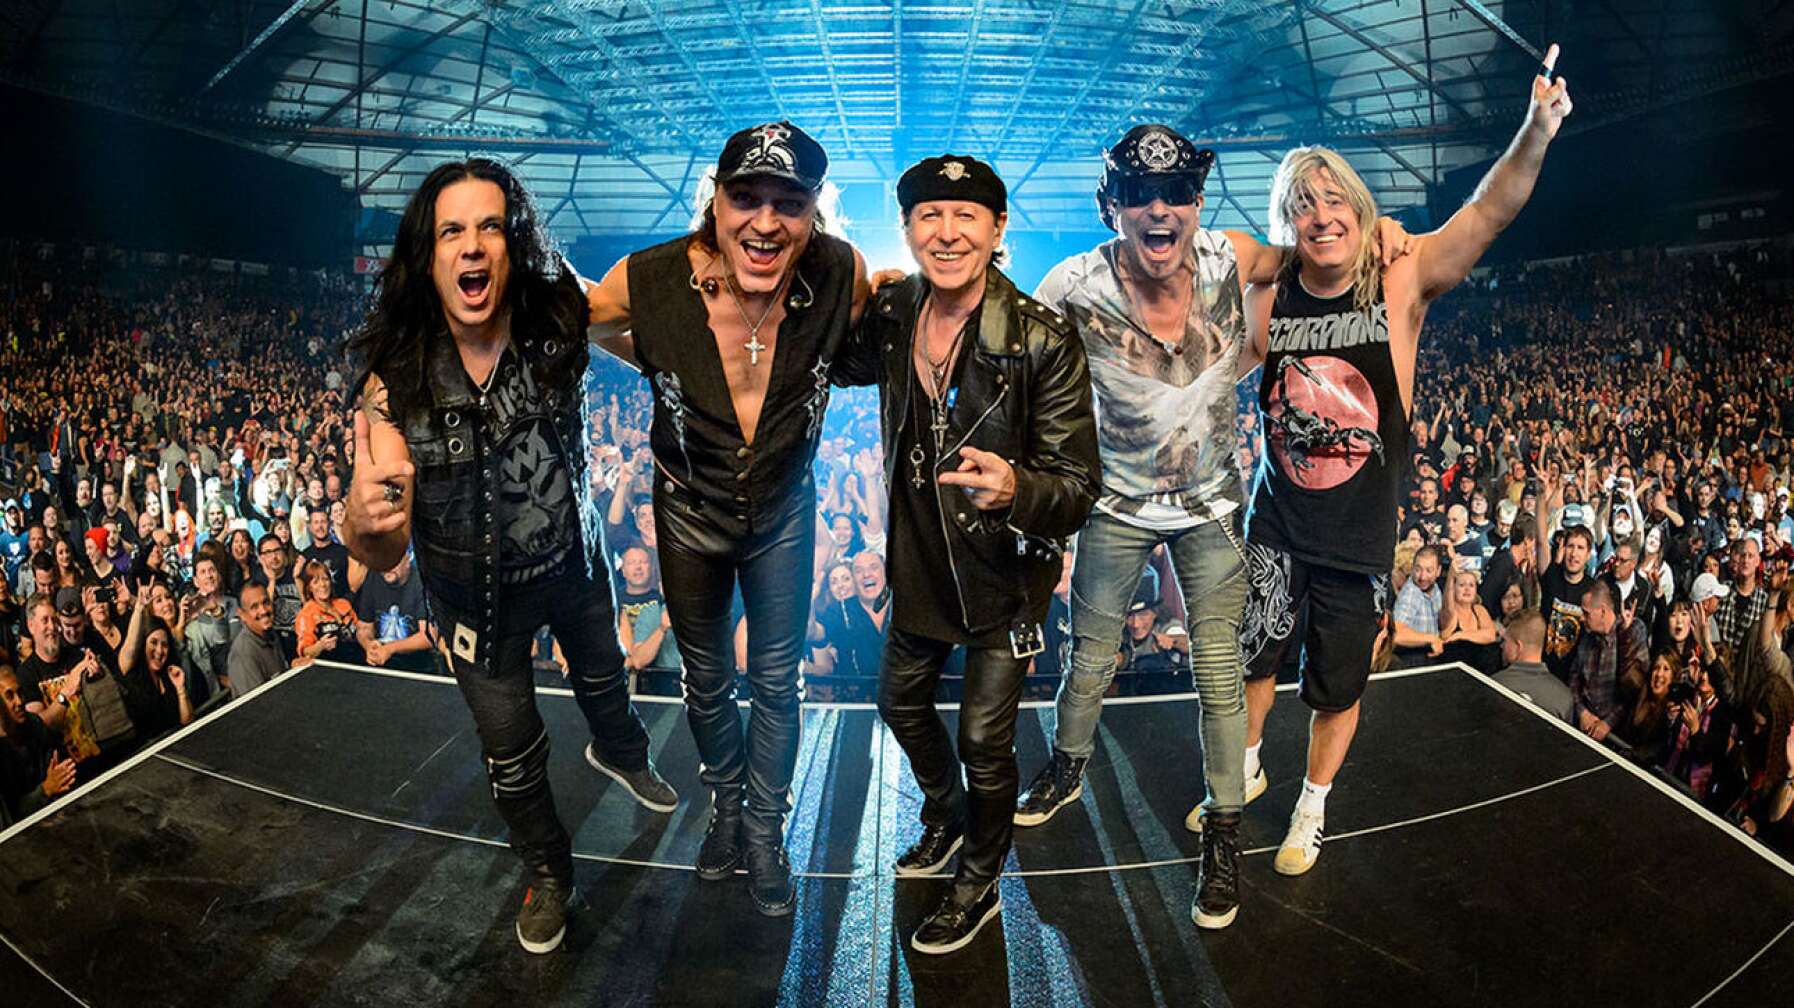 Scorpions on stage posierend